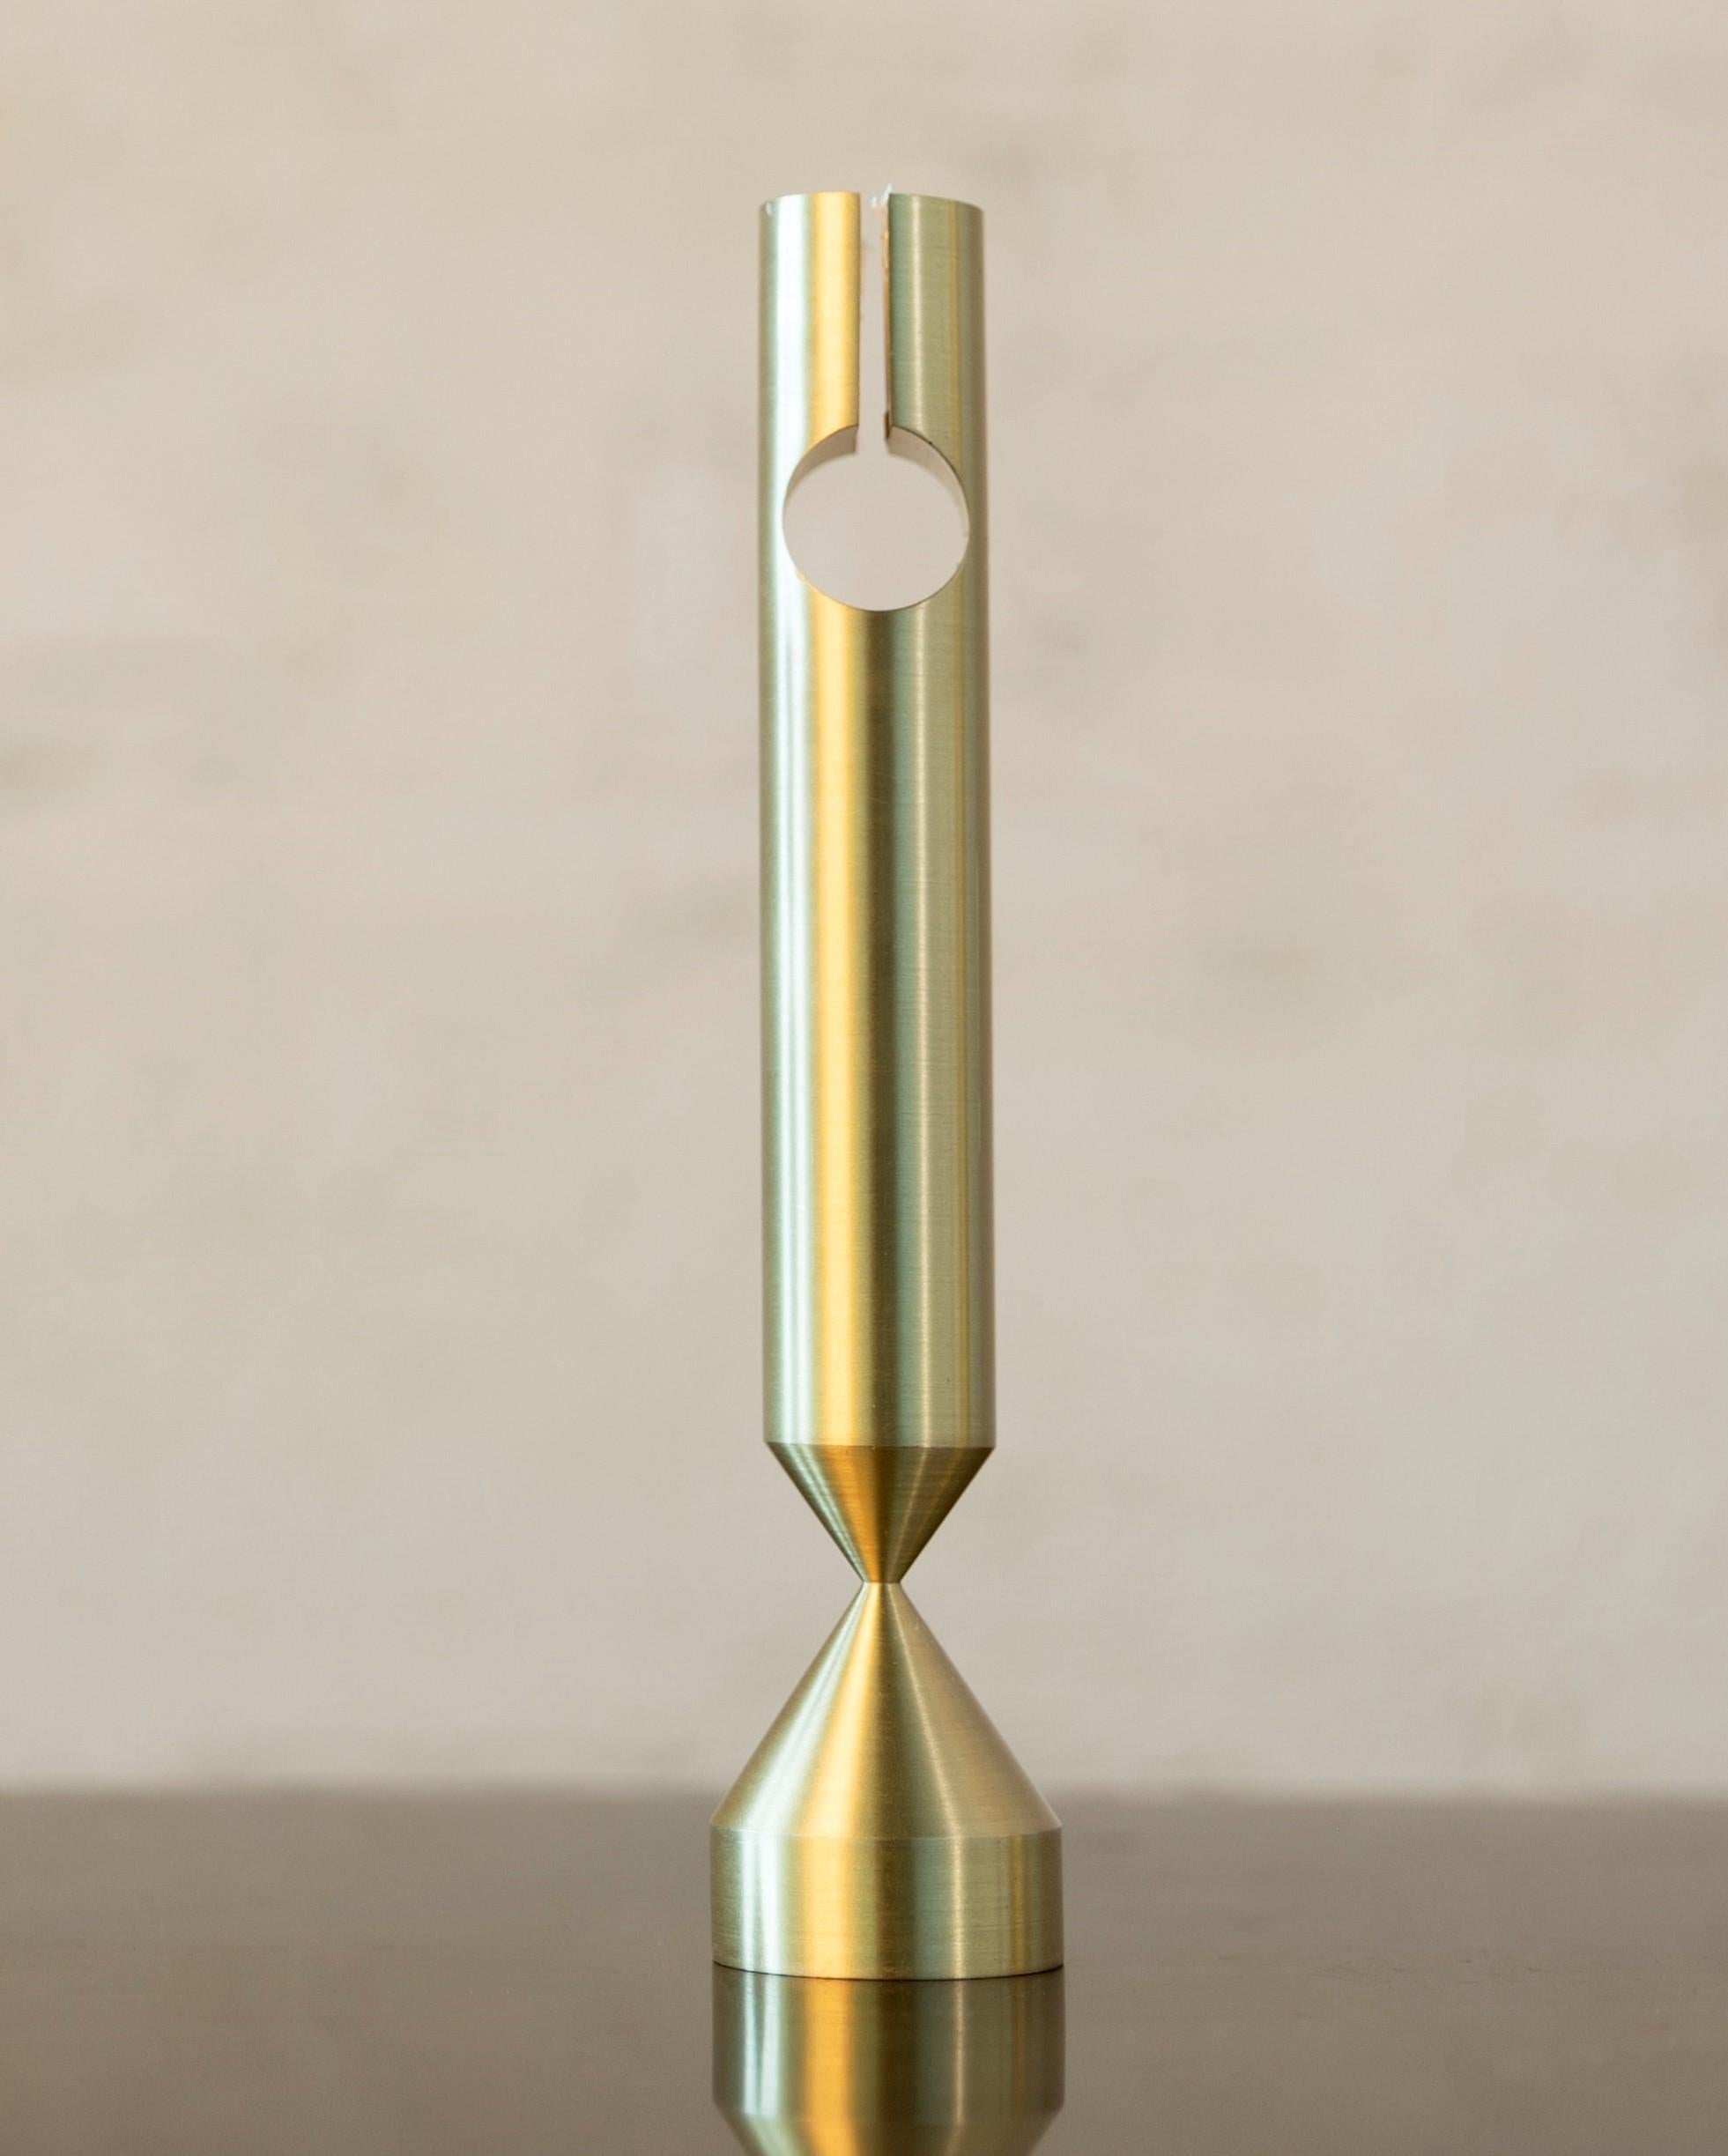 Medium pillar brass candlestick by Gentner Design
Dimensions: D 3.8 x H 16.3 cm
Materials: brush raw brass
Available in brush raw brass and darkened brass.
Available in small, medium and large.

Gentner Design
Rooted in a language of